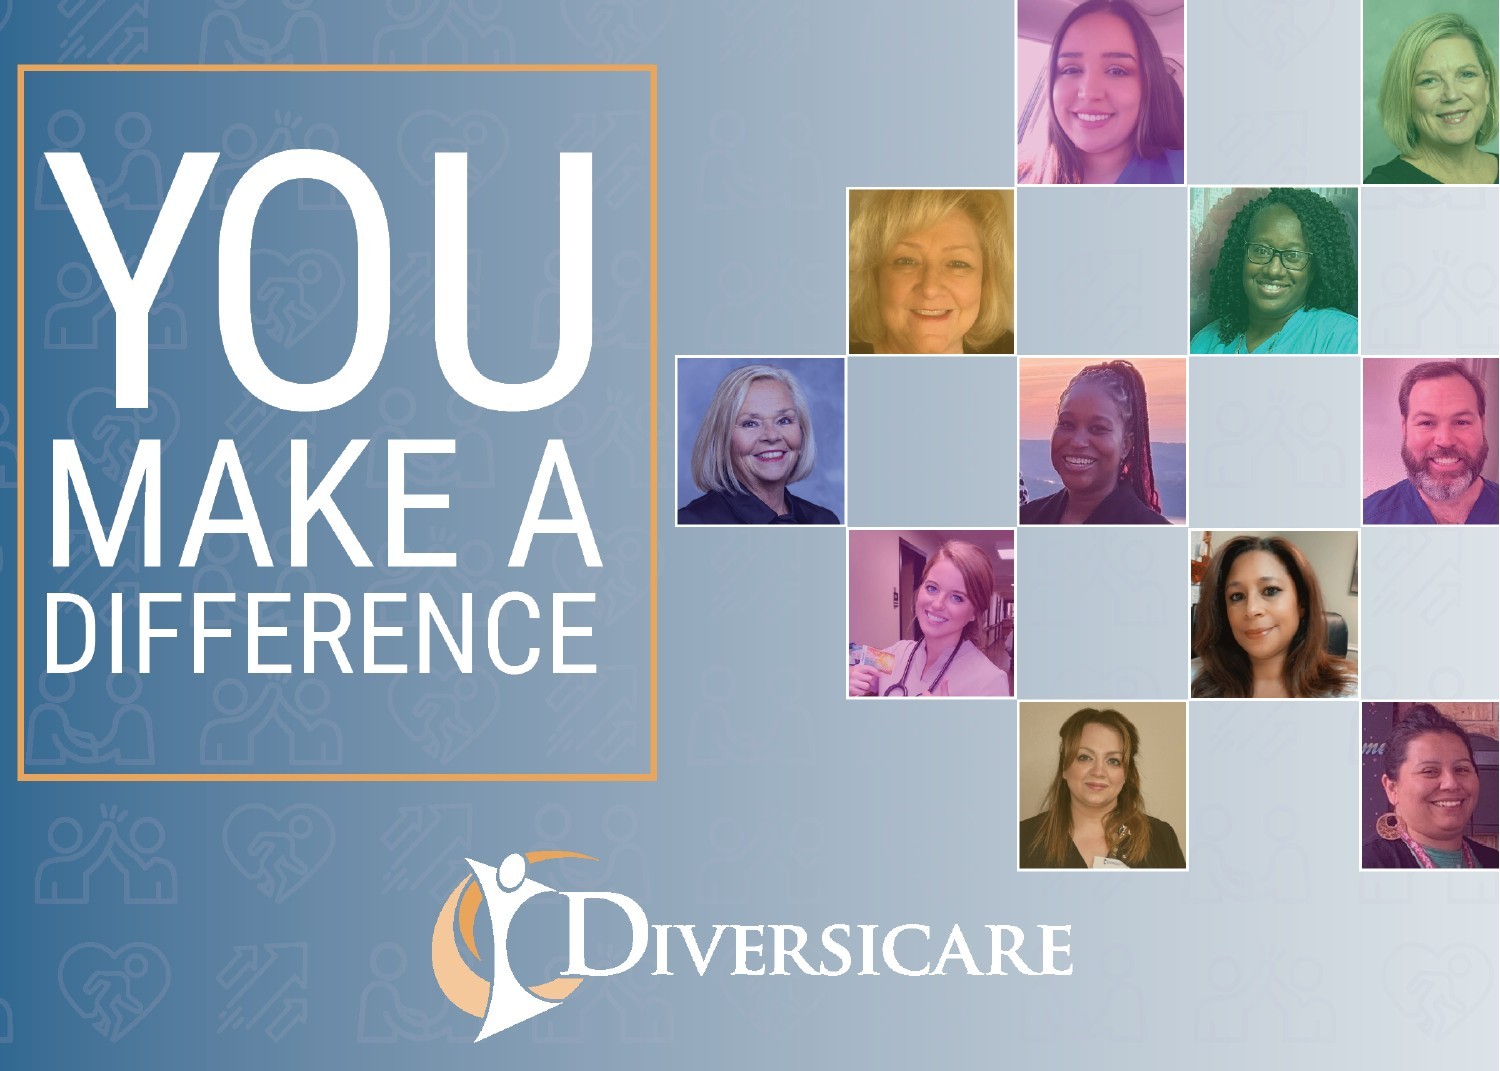 Our team member are the Diversicare Difference!